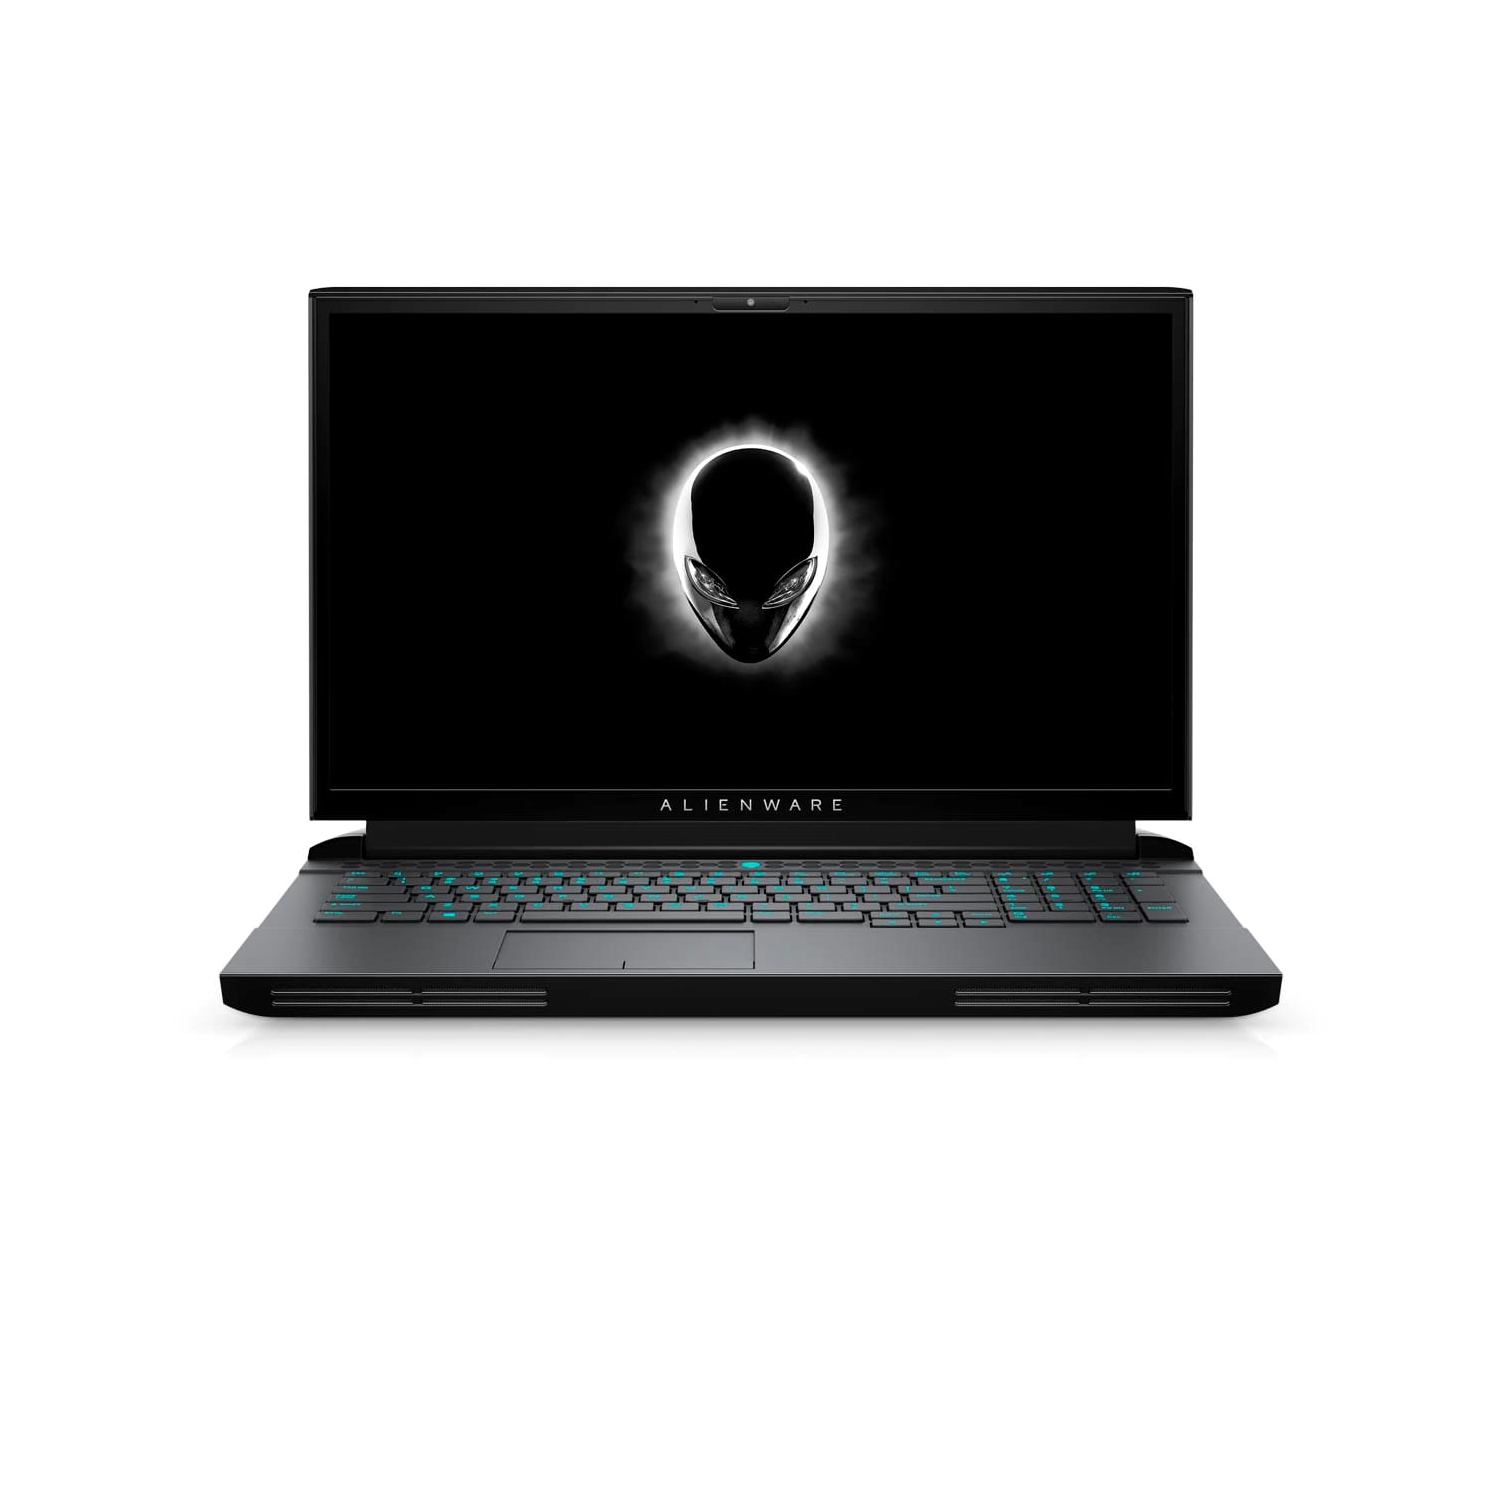 Refurbished (Excellent) - Dell Alienware 17 51m R2 Gaming Laptop (2020), 17.3" FHD, Core i7 - 1TB HDD + 512GB SSD - 16GB RAM - RTX 2060, 4.8 GHz - 10th Gen CPU Certified